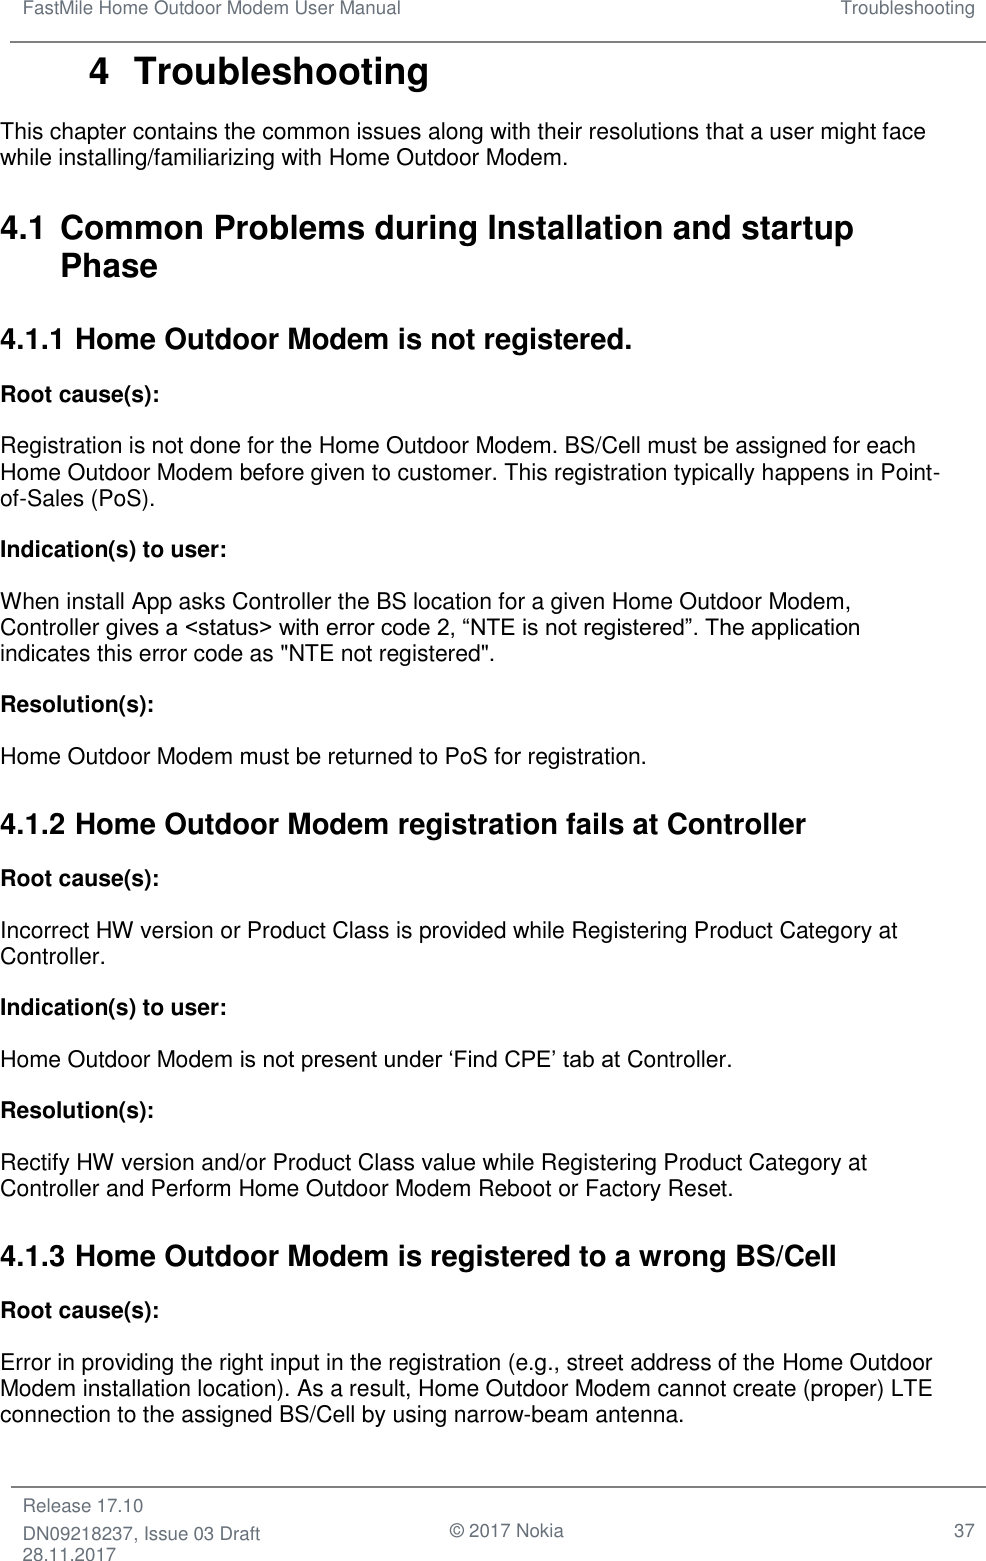 FastMile Home Outdoor Modem User Manual Troubleshooting  Release 17.10 DN09218237, Issue 03 Draft 28.11.2017                                © 2017 Nokia 37  4  Troubleshooting This chapter contains the common issues along with their resolutions that a user might face while installing/familiarizing with Home Outdoor Modem. 4.1 Common Problems during Installation and startup Phase 4.1.1 Home Outdoor Modem is not registered. Root cause(s):  Registration is not done for the Home Outdoor Modem. BS/Cell must be assigned for each Home Outdoor Modem before given to customer. This registration typically happens in Point-of-Sales (PoS). Indication(s) to user:  When install App asks Controller the BS location for a given Home Outdoor Modem, Controller gives a &lt;status&gt; with error code 2, “NTE is not registered”. The application indicates this error code as &quot;NTE not registered&quot;. Resolution(s):  Home Outdoor Modem must be returned to PoS for registration. 4.1.2 Home Outdoor Modem registration fails at Controller Root cause(s): Incorrect HW version or Product Class is provided while Registering Product Category at Controller.  Indication(s) to user: Home Outdoor Modem is not present under ‘Find CPE’ tab at Controller. Resolution(s):  Rectify HW version and/or Product Class value while Registering Product Category at Controller and Perform Home Outdoor Modem Reboot or Factory Reset. 4.1.3 Home Outdoor Modem is registered to a wrong BS/Cell  Root cause(s):  Error in providing the right input in the registration (e.g., street address of the Home Outdoor Modem installation location). As a result, Home Outdoor Modem cannot create (proper) LTE connection to the assigned BS/Cell by using narrow-beam antenna.  